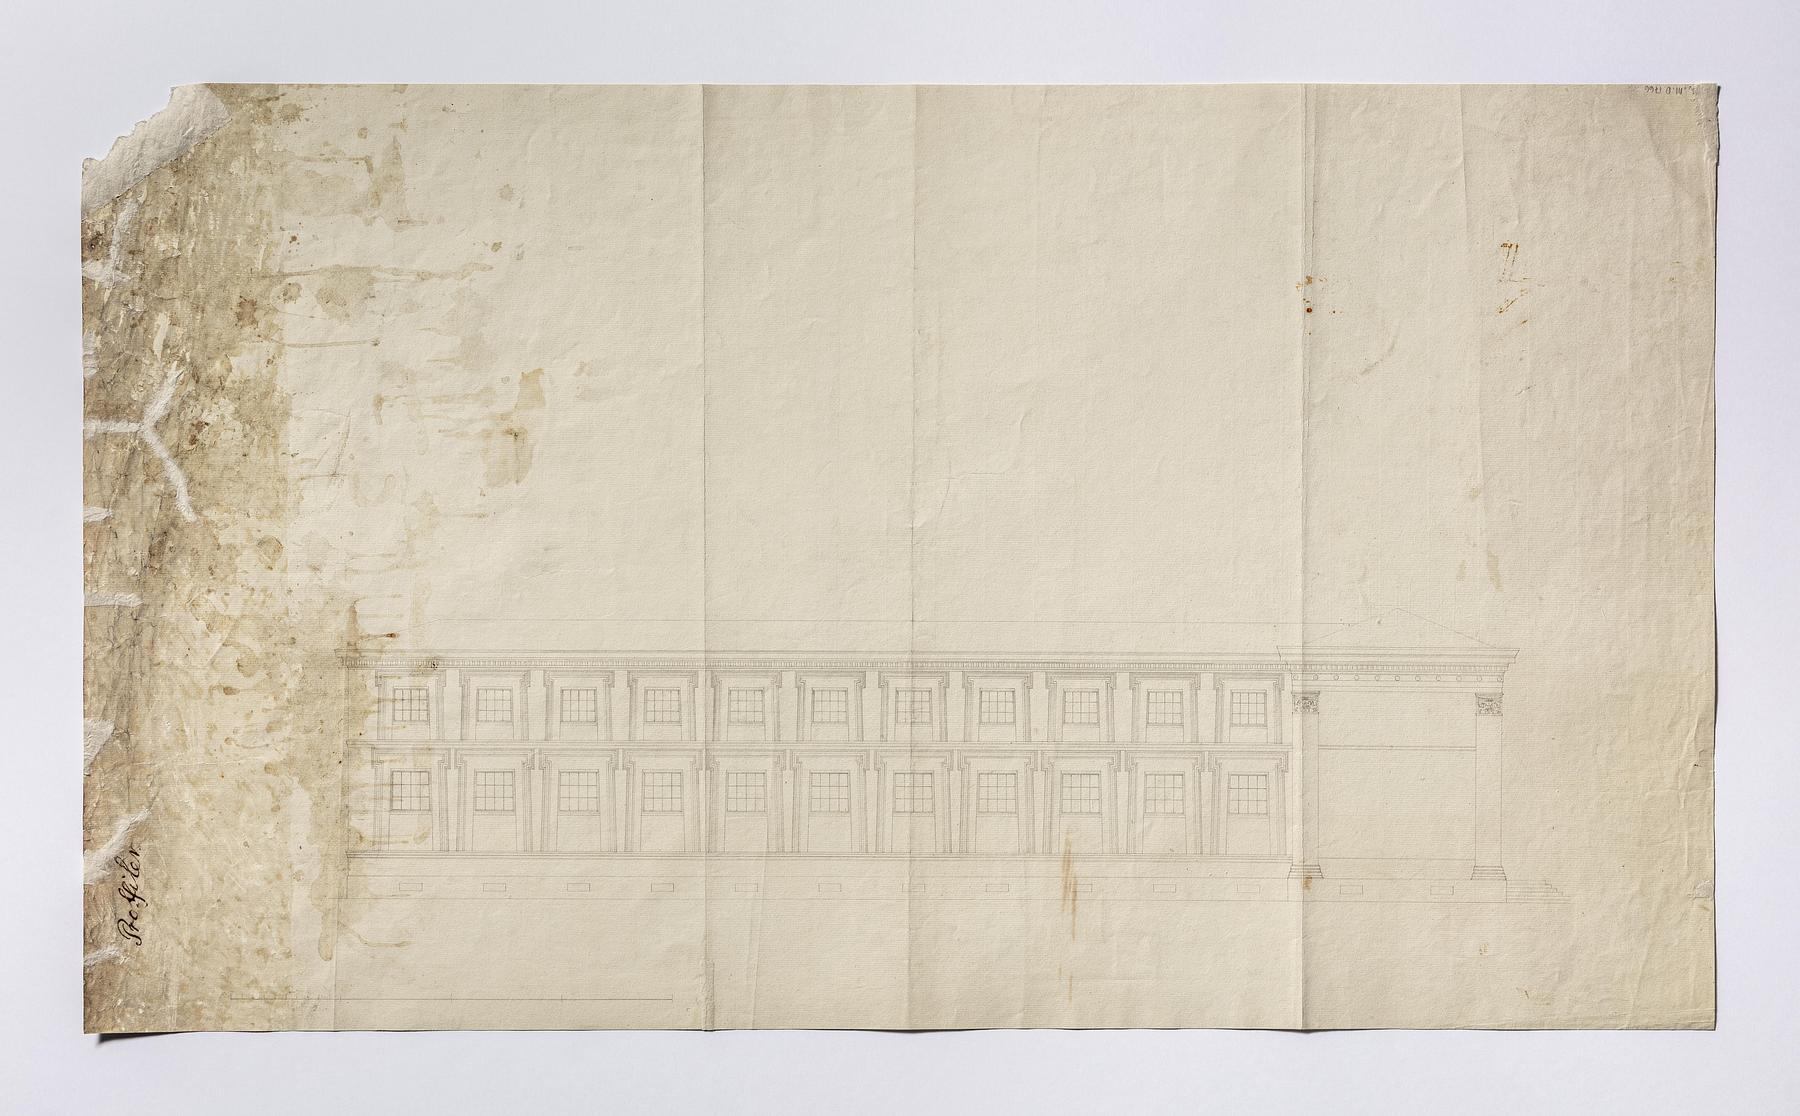 Thorvaldsens Museum, Elevation of the Facade towards the Canal, D1766v